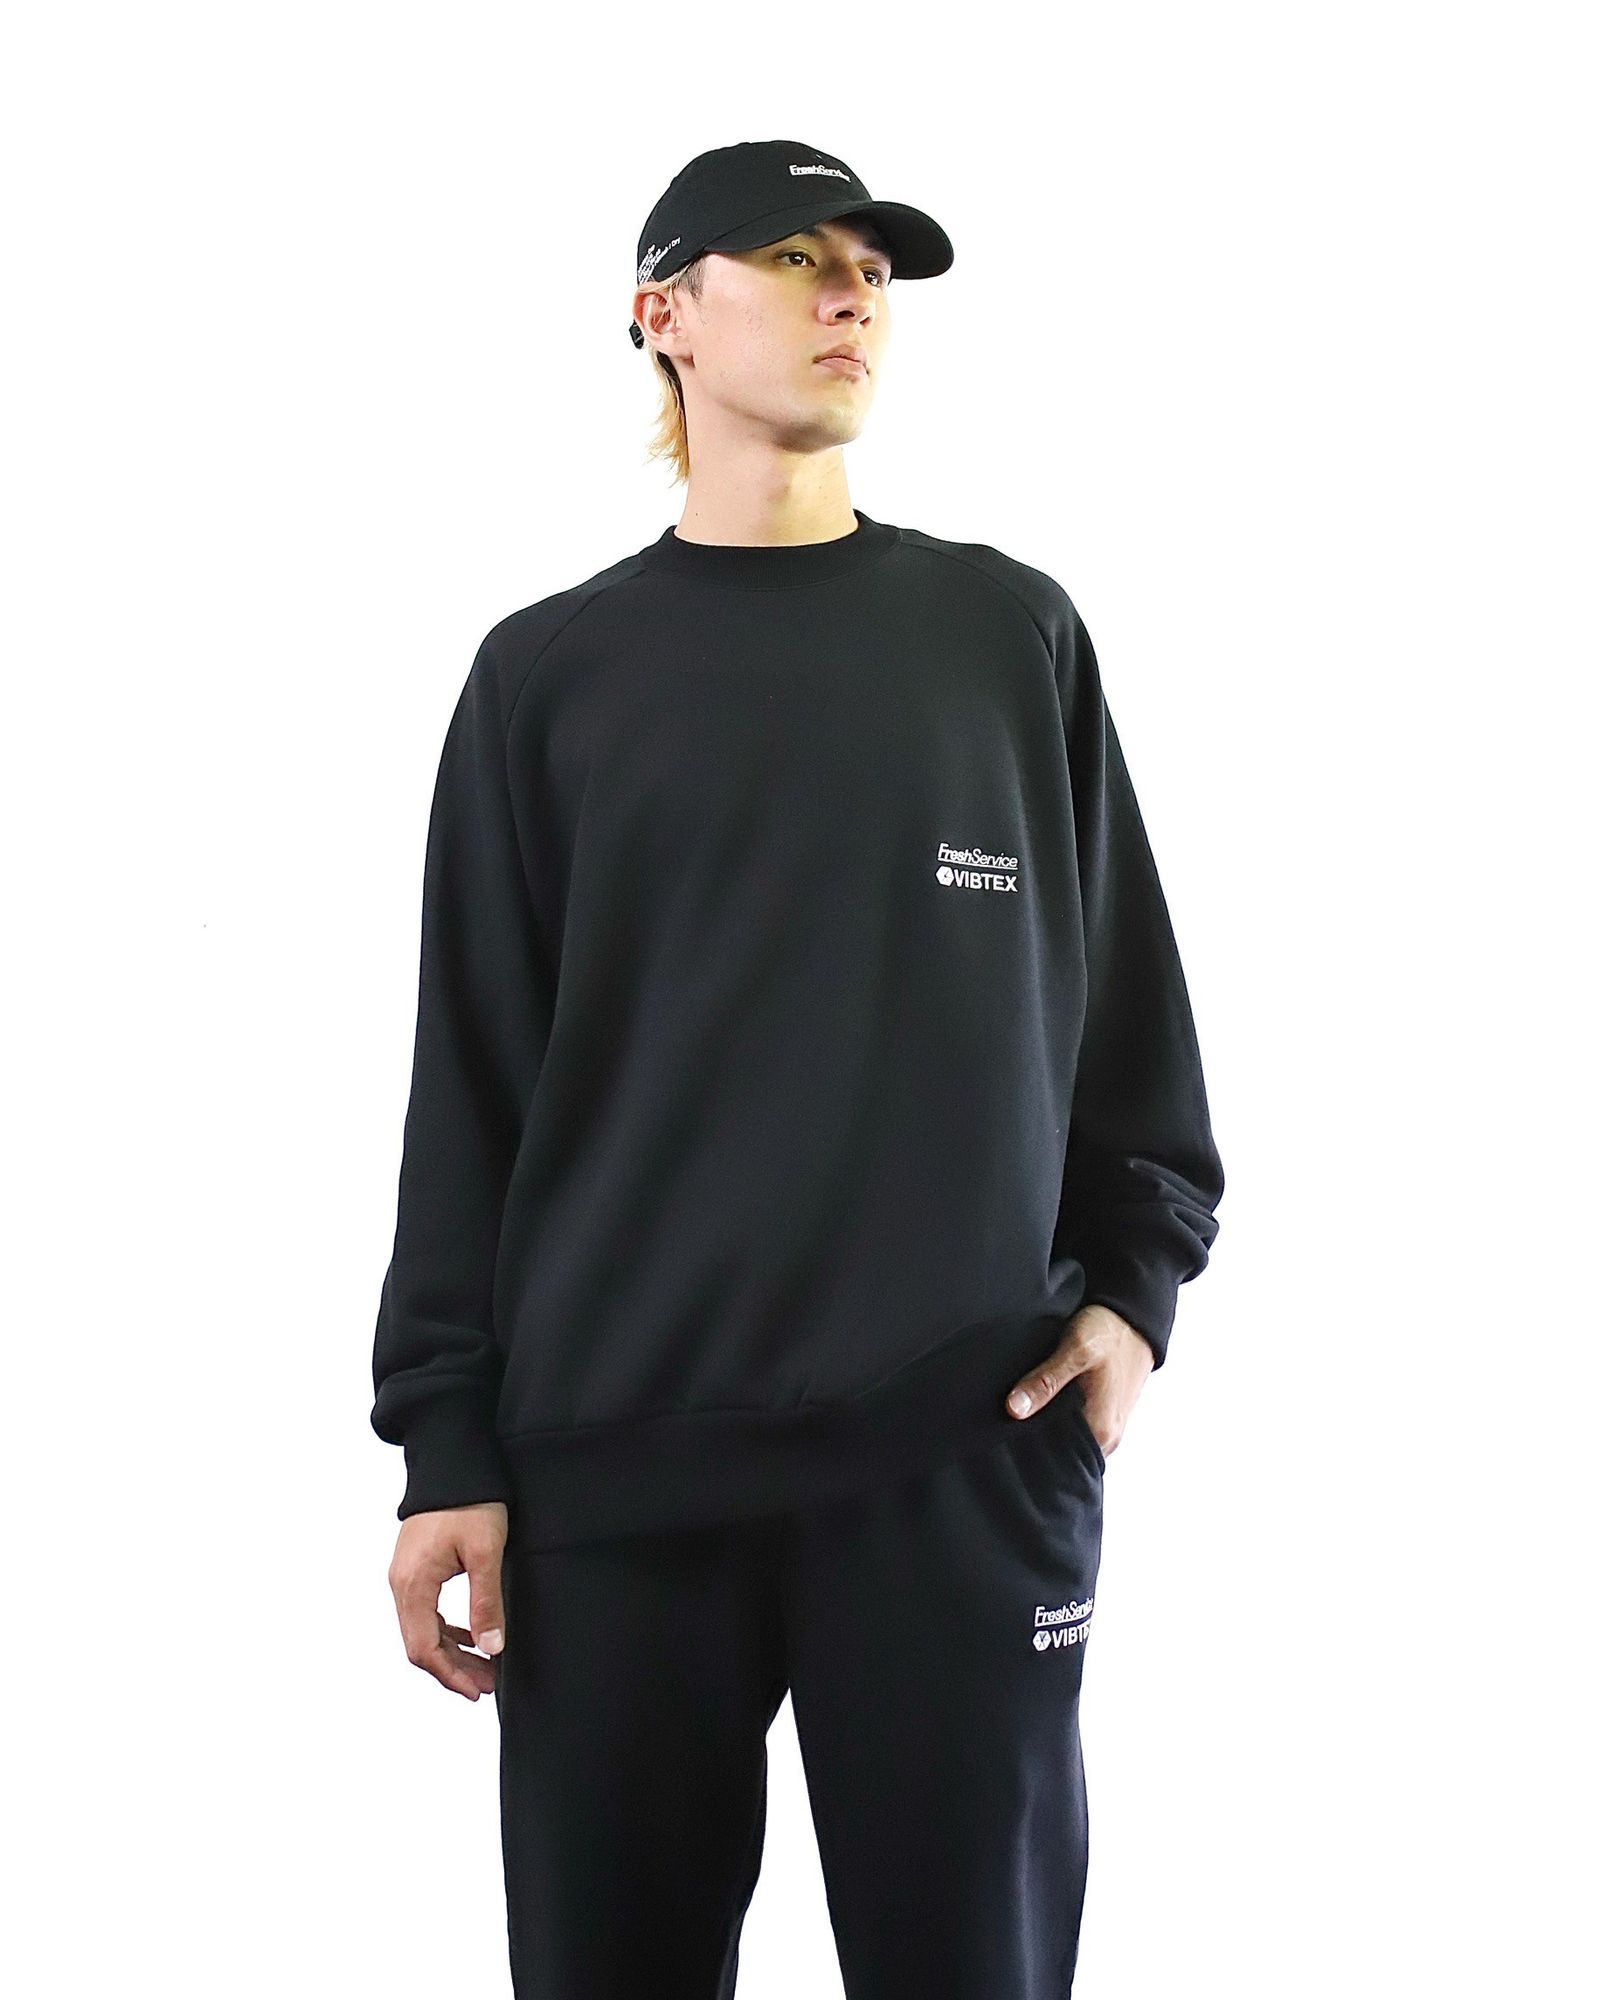 VIBTEX for FreshService 24SS SWEAT CREW NECK PULLOVER(BLACK) style ...